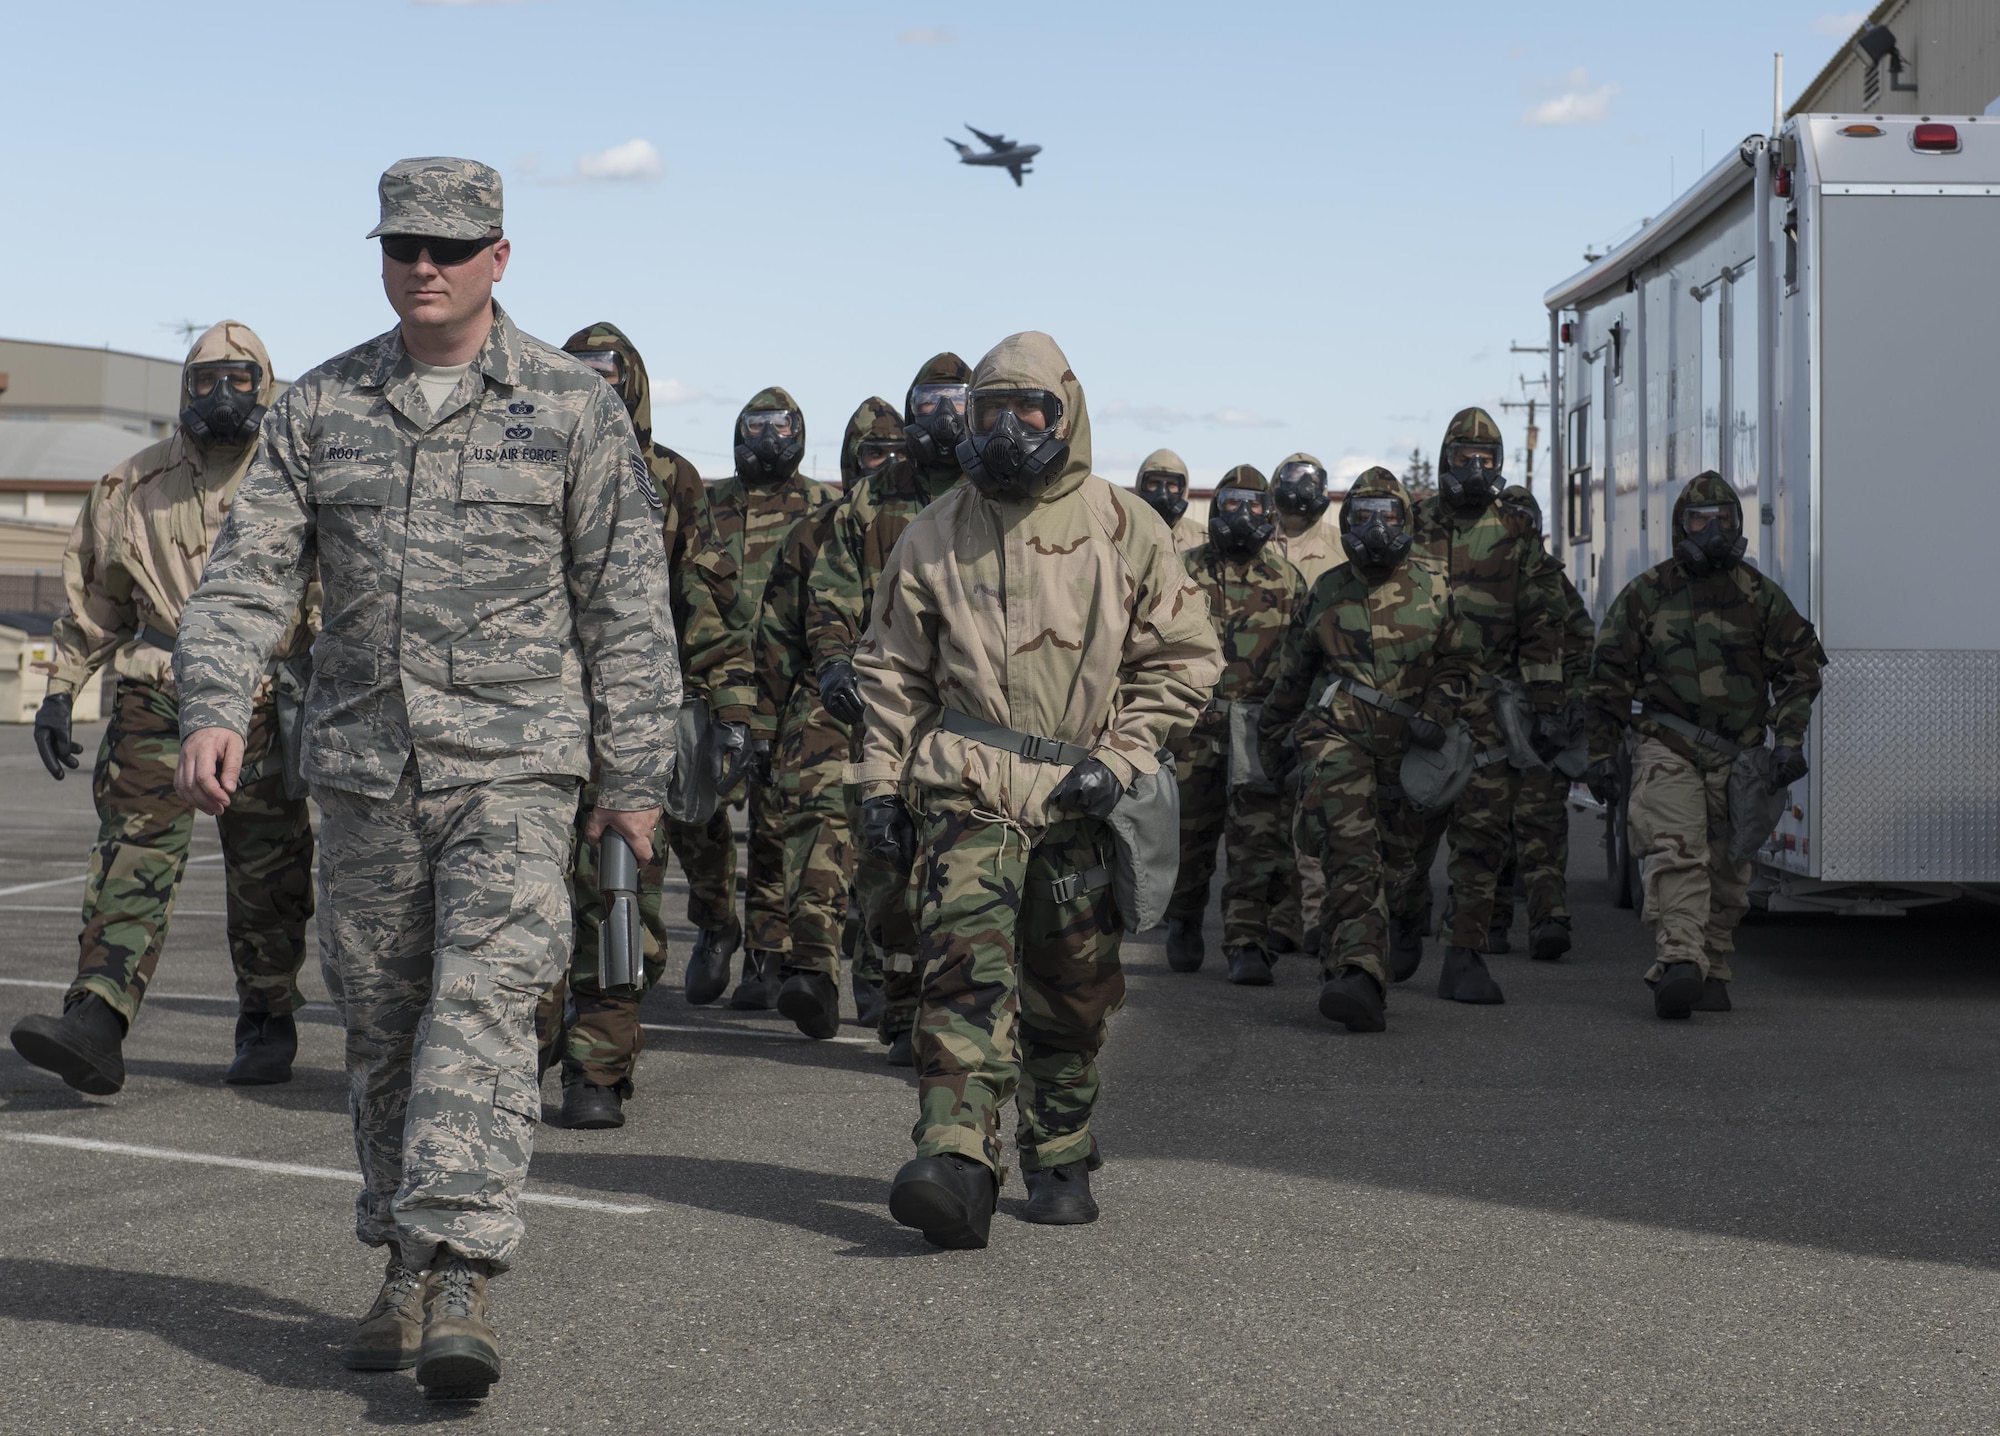 U. S. Air Force Airmen participate in a chemical, biological, radiological and nuclear defense survival skills training course on Travis Air Force Base, Calif., Sep. 21, 2017. The CBRN defense course consists of individual knowledge-based and demonstration performance objectives that provide an in-depth education on CBRN defense hazards and protective actions. (U.S. Air Force photo by Heide Couch)